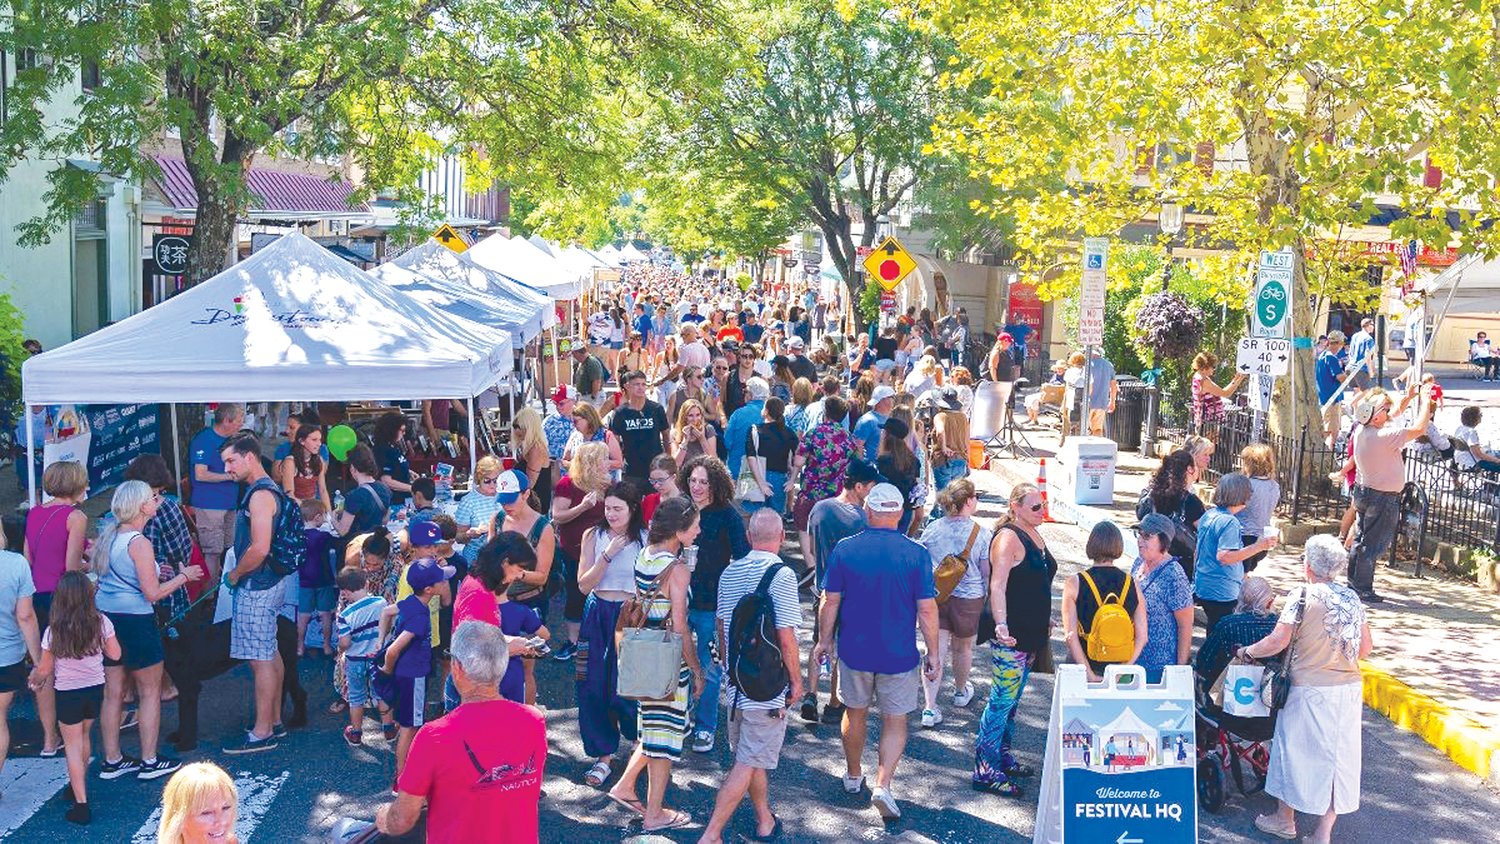 Doylestown Arts Festival issues call for artists and performers for 2023 event.